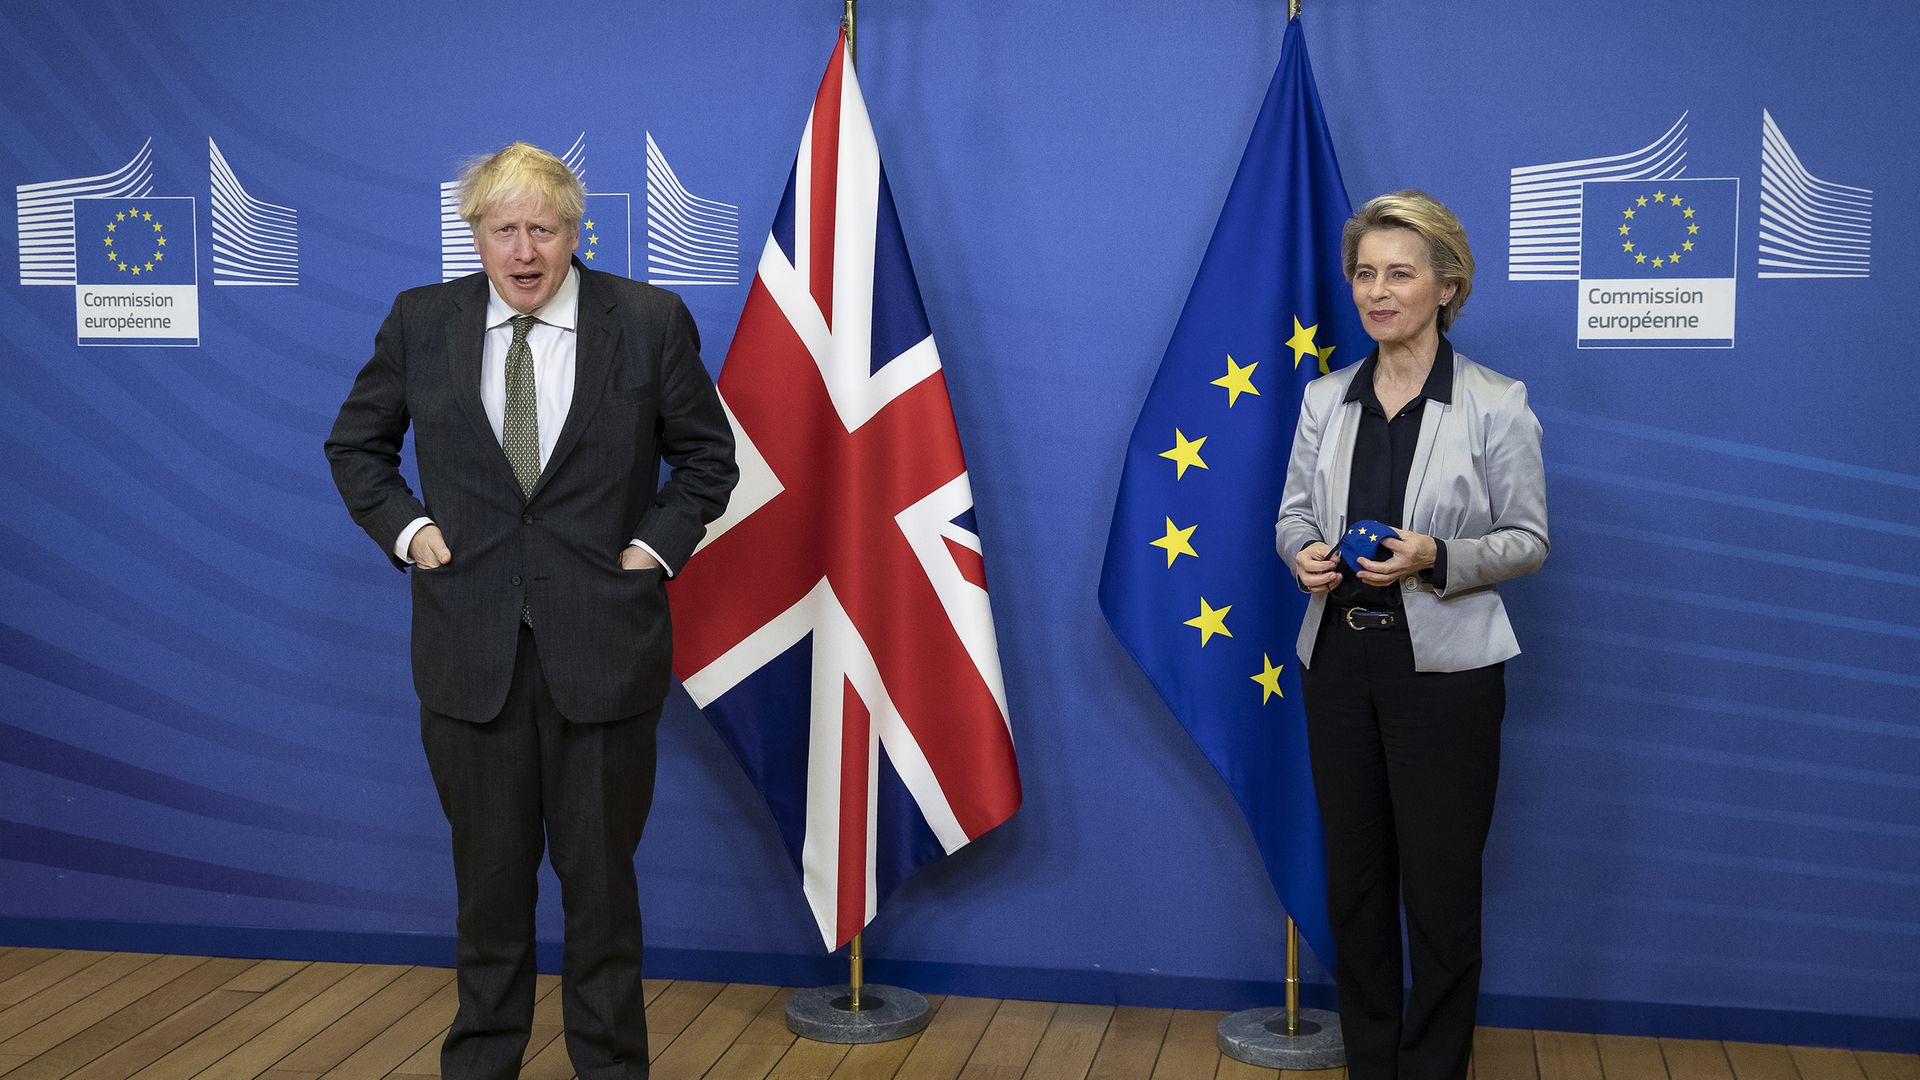 Prime Minister Boris Johnson in Brussels, Belgium, for a dinner with European Commission president Ursula von der Leyen where they will try to reach a breakthrough on a post-Brexit trade deal. - Credit: PA